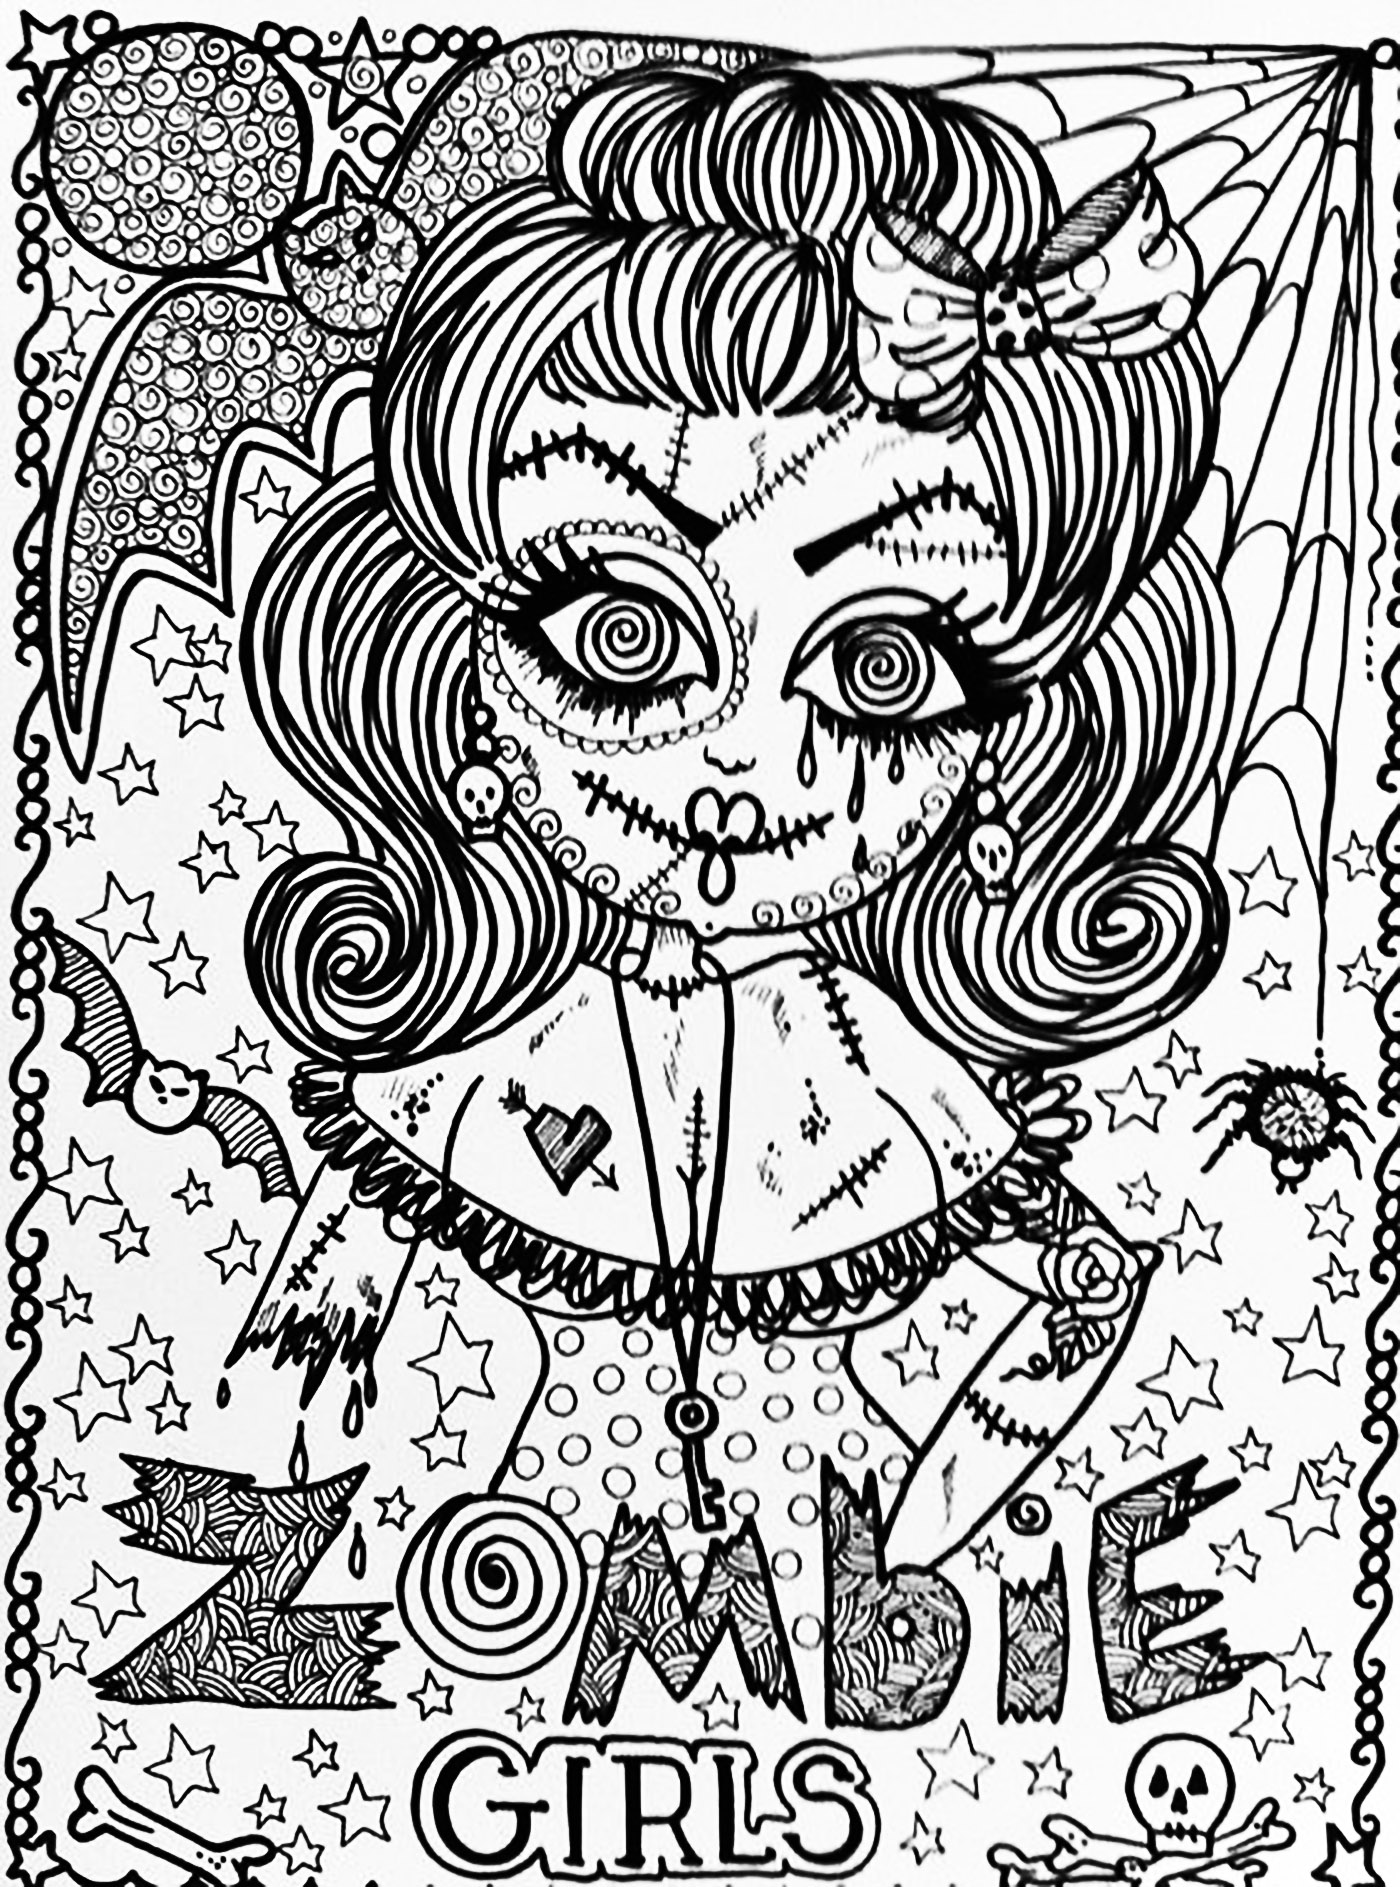 adult coloring pages zombies